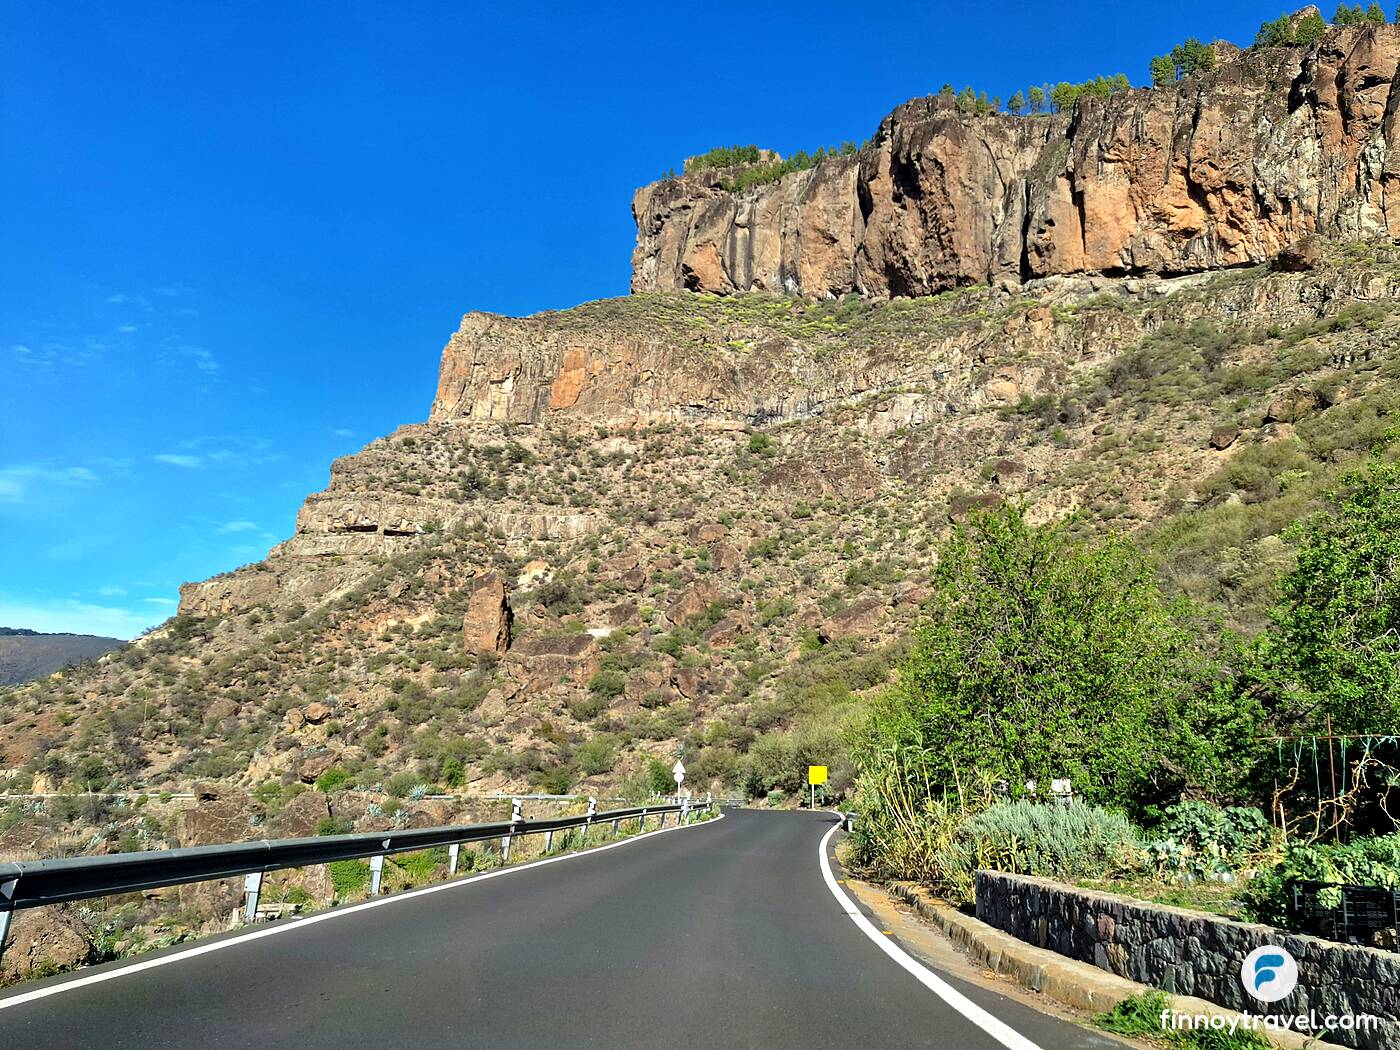 Road in mountains in Gran Canaria